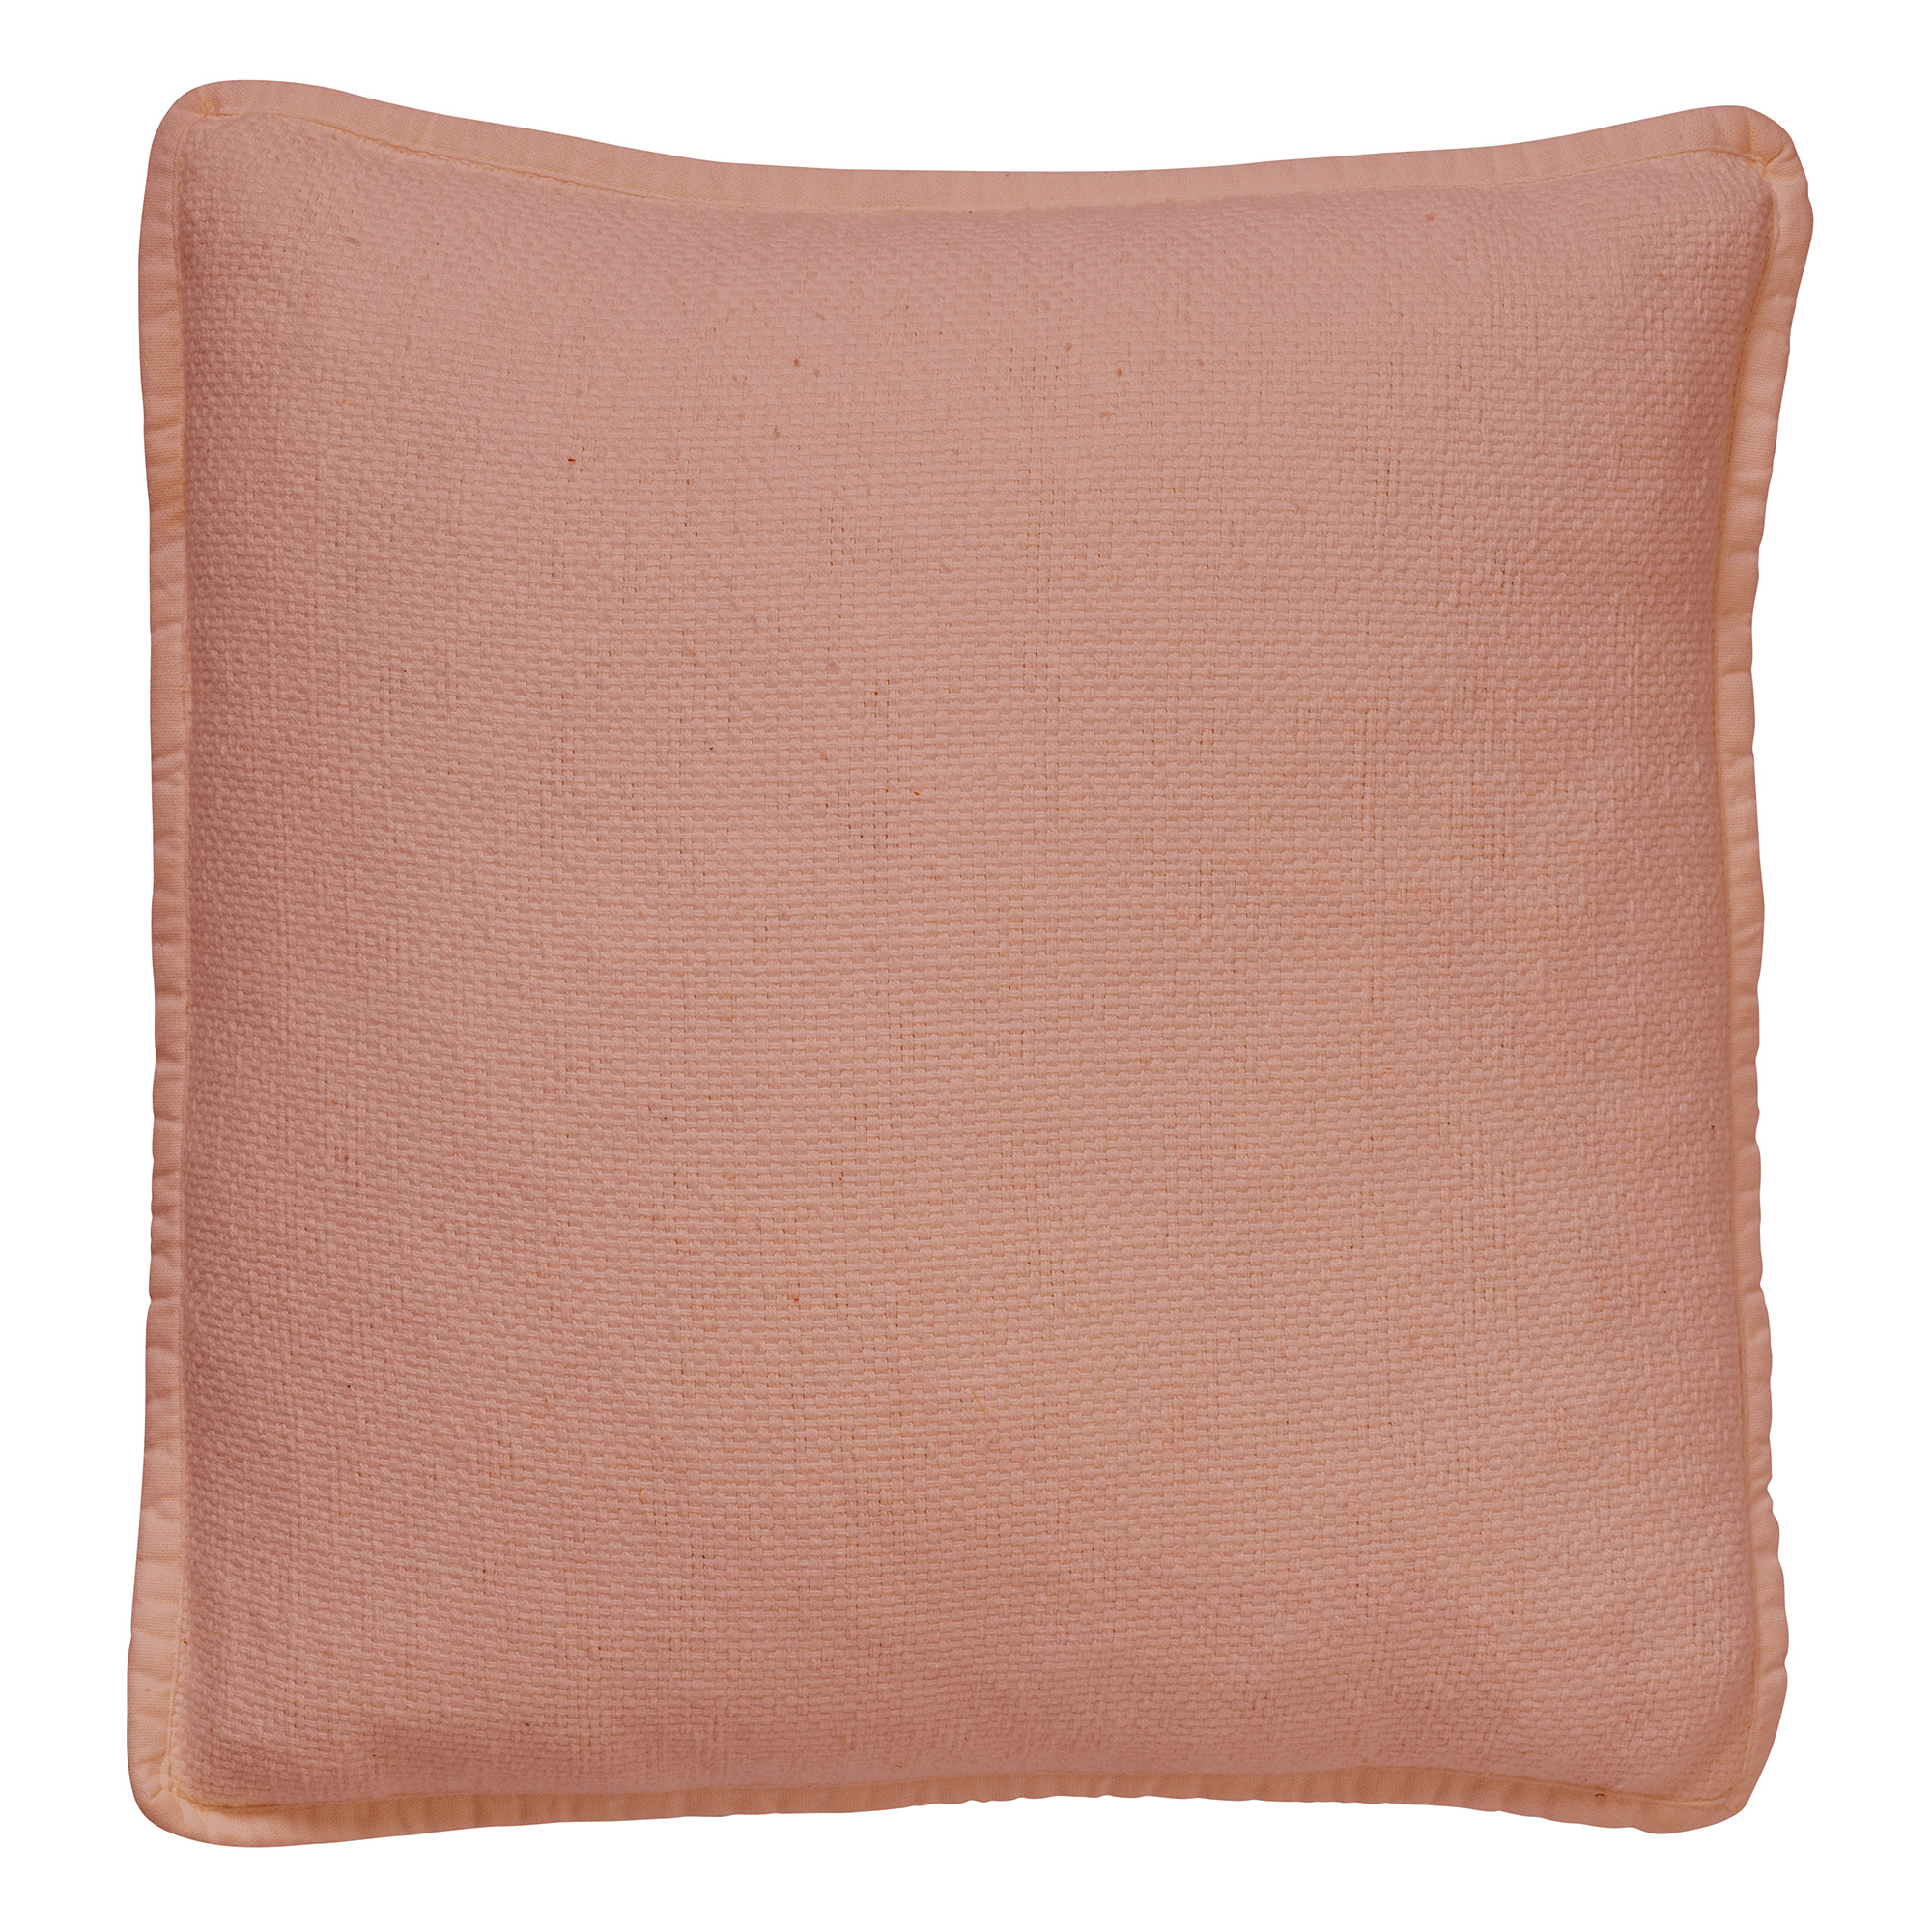 BOWIE - Cushion 45x45 cm Muted Clay - pink